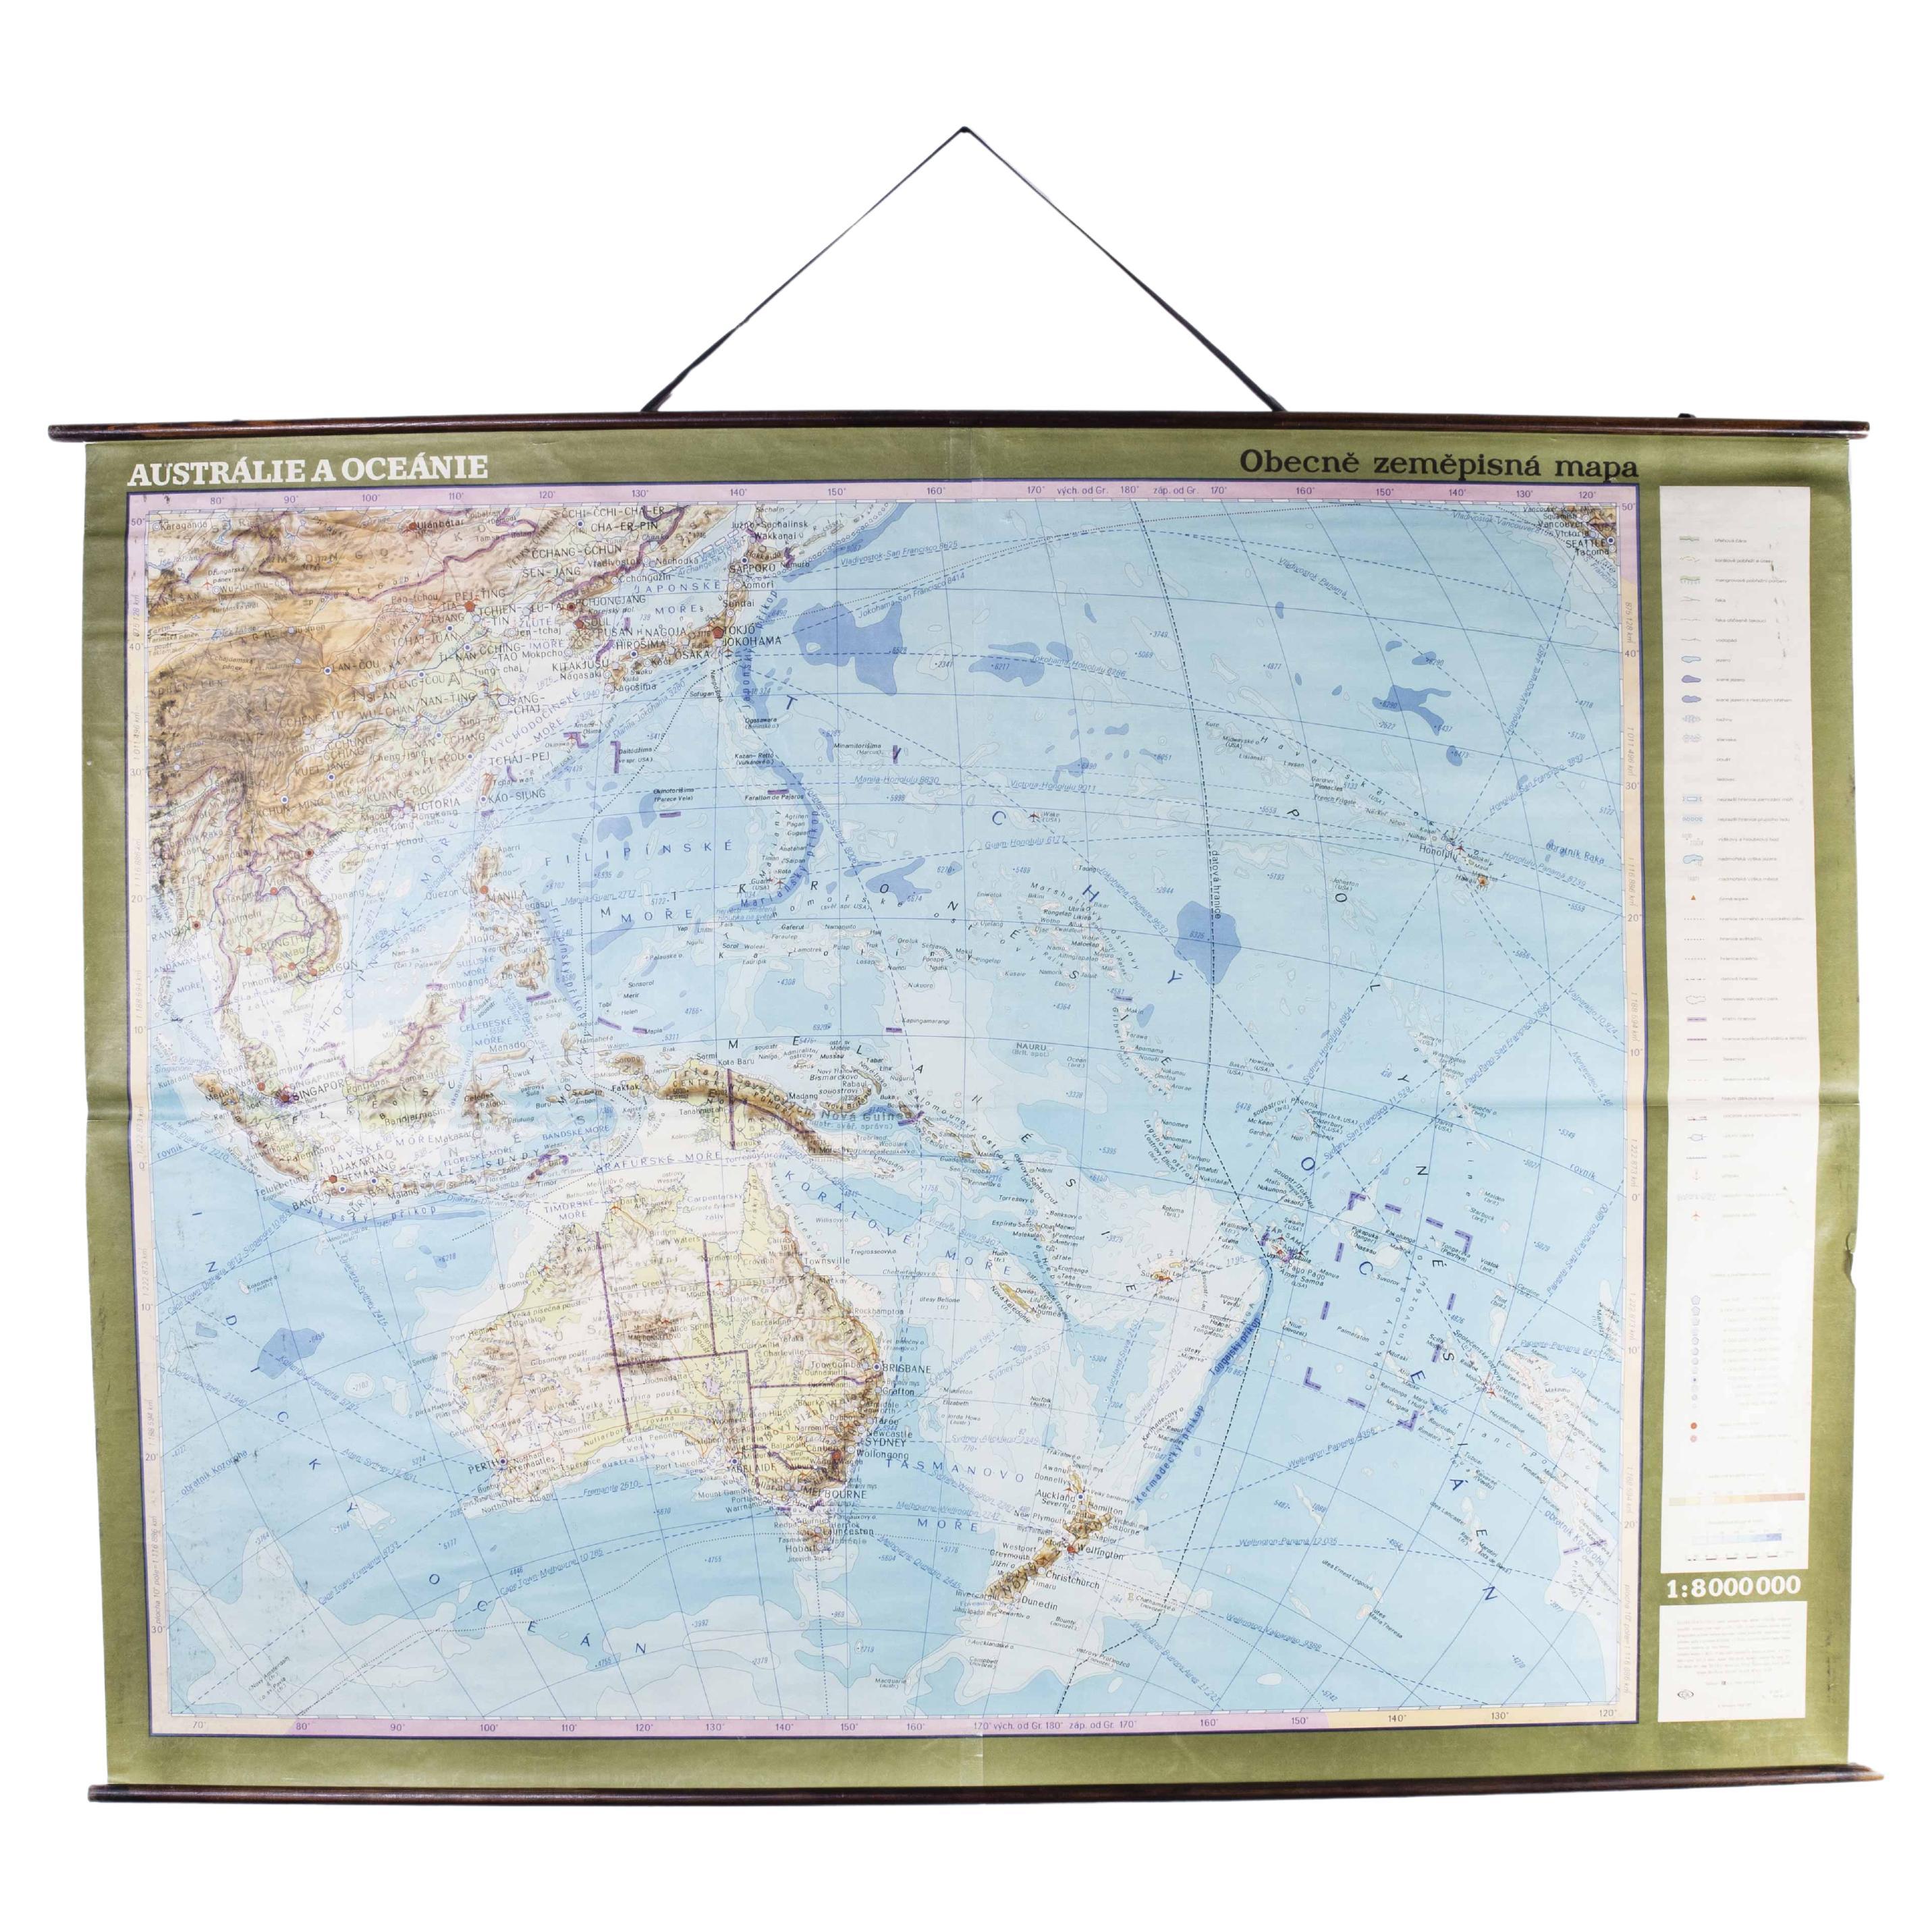 Late 20th Century Educational Geographic Map - Australasia